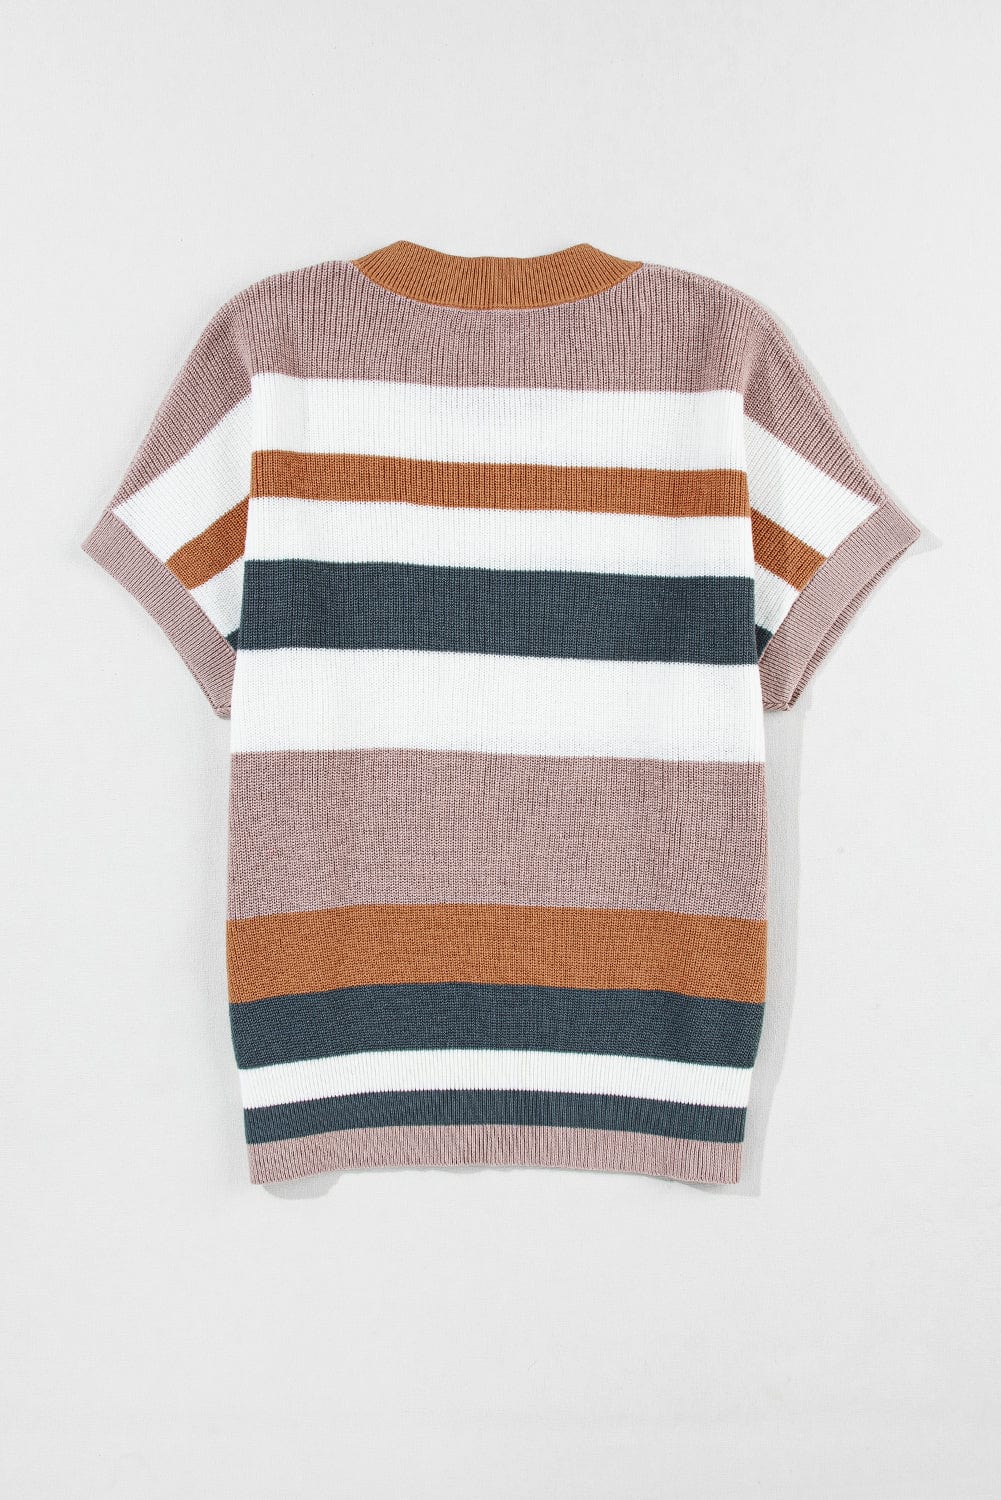 The802Gypsy  shirts and tops TRAVELING GYPSY-Cotton Colorblock Knit Sweater